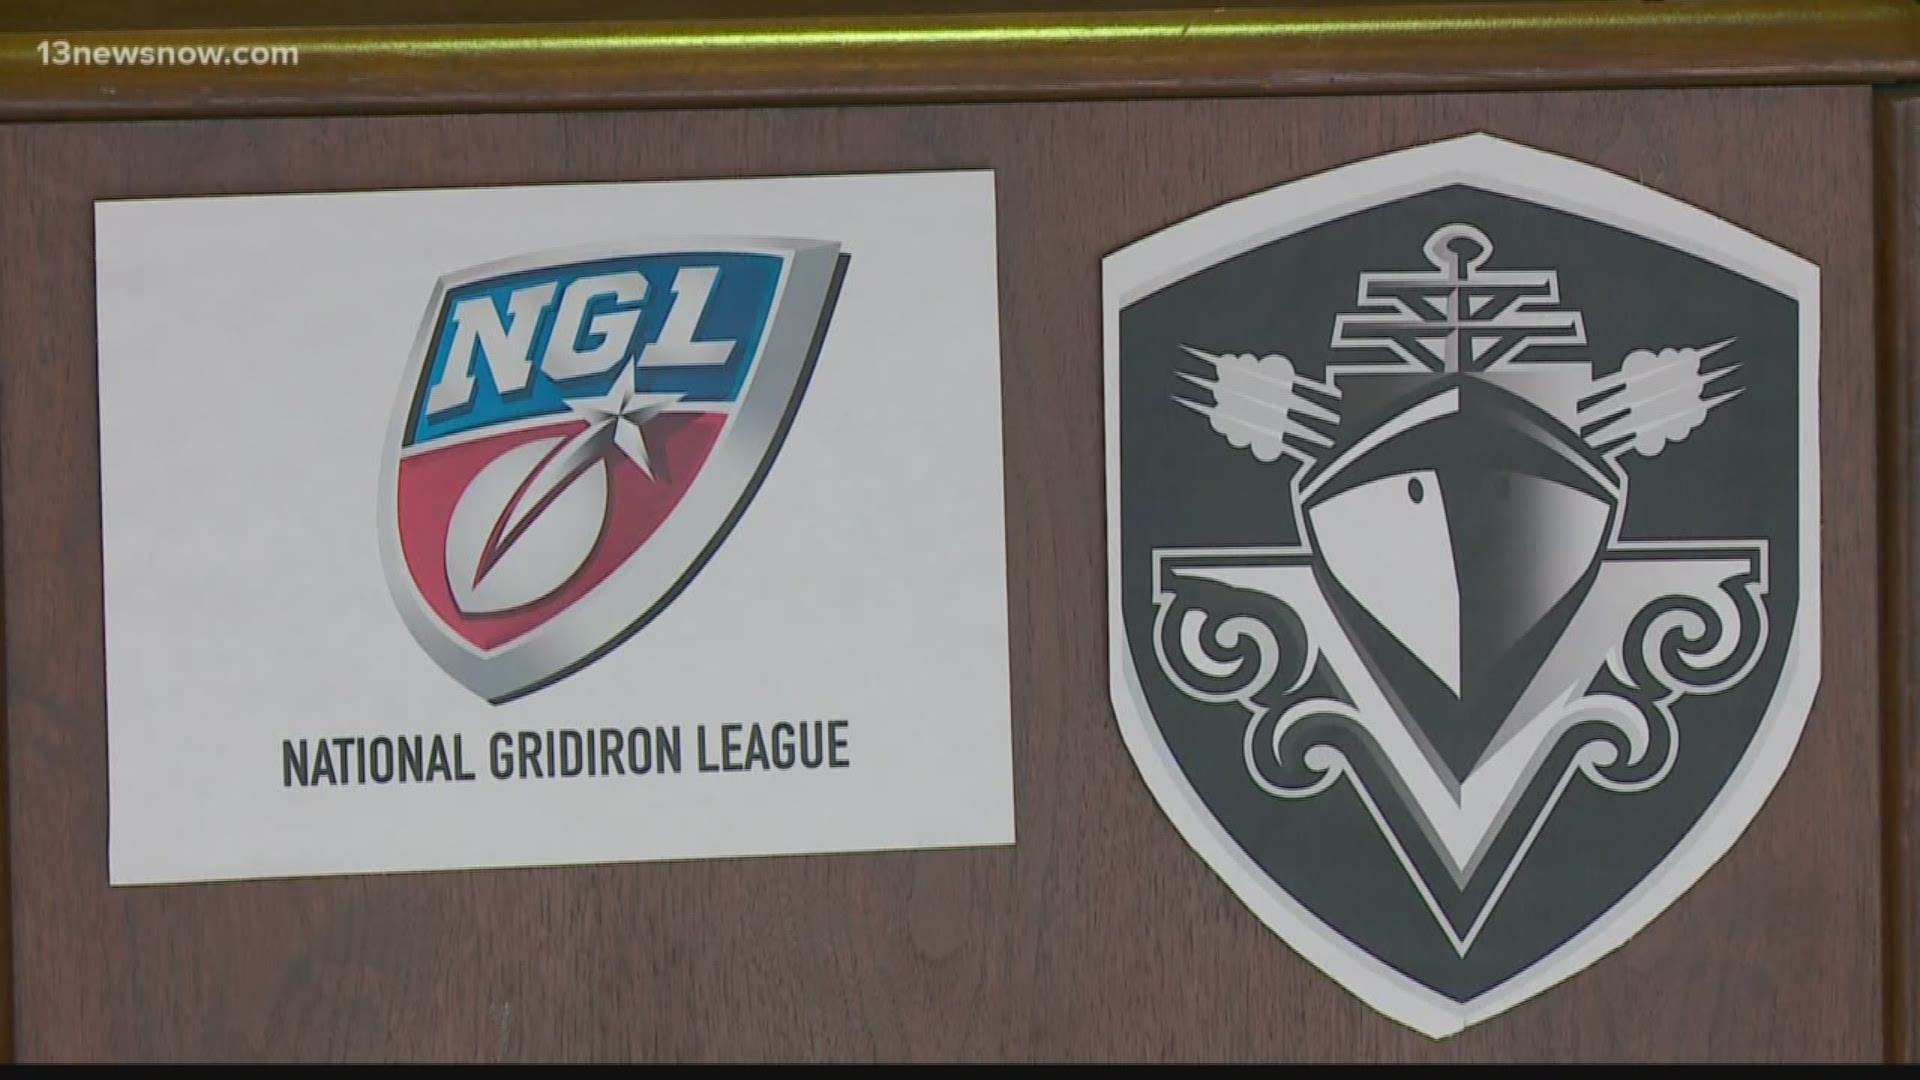 They're a new team in a new league. The Destroyers in the National Gridiron League bring arena football back to Hampton Roads.